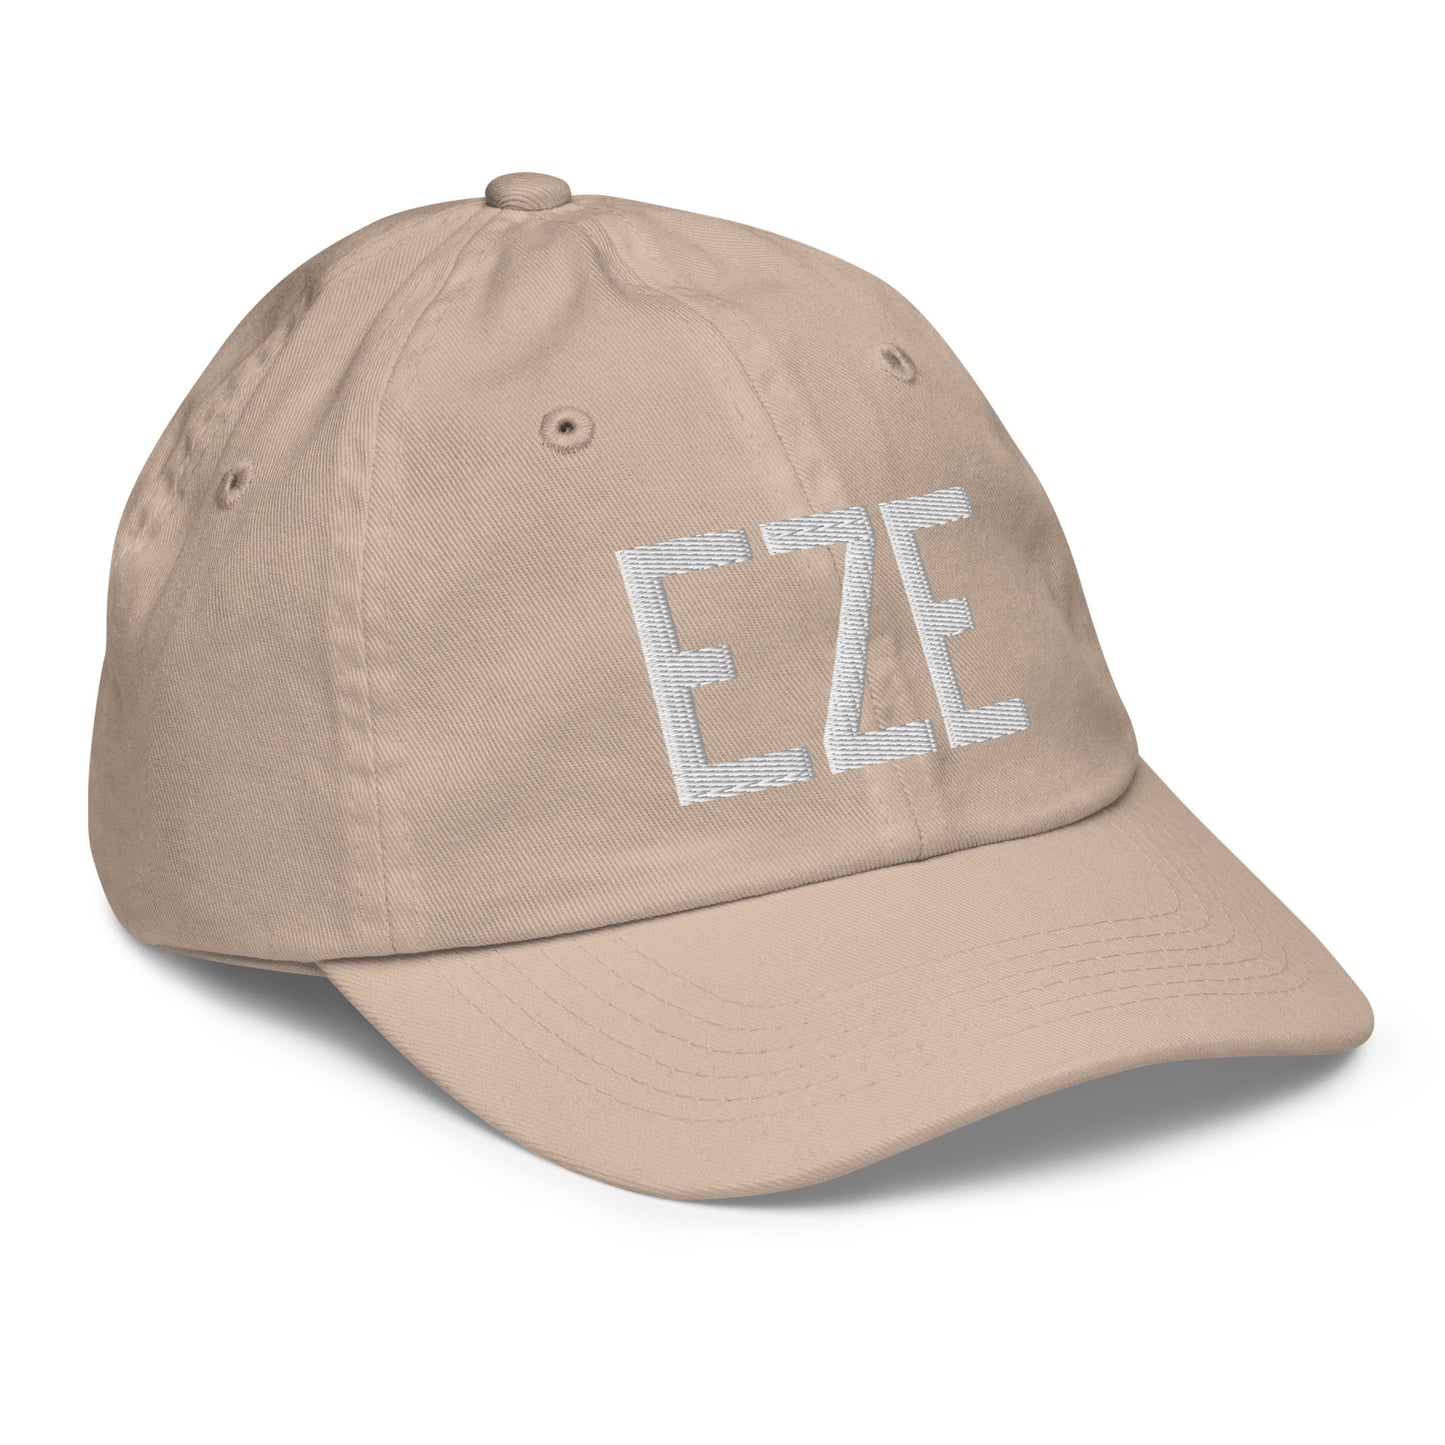 Airport Code Kid's Baseball Cap - White • EZE Buenos Aires • YHM Designs - Image 29